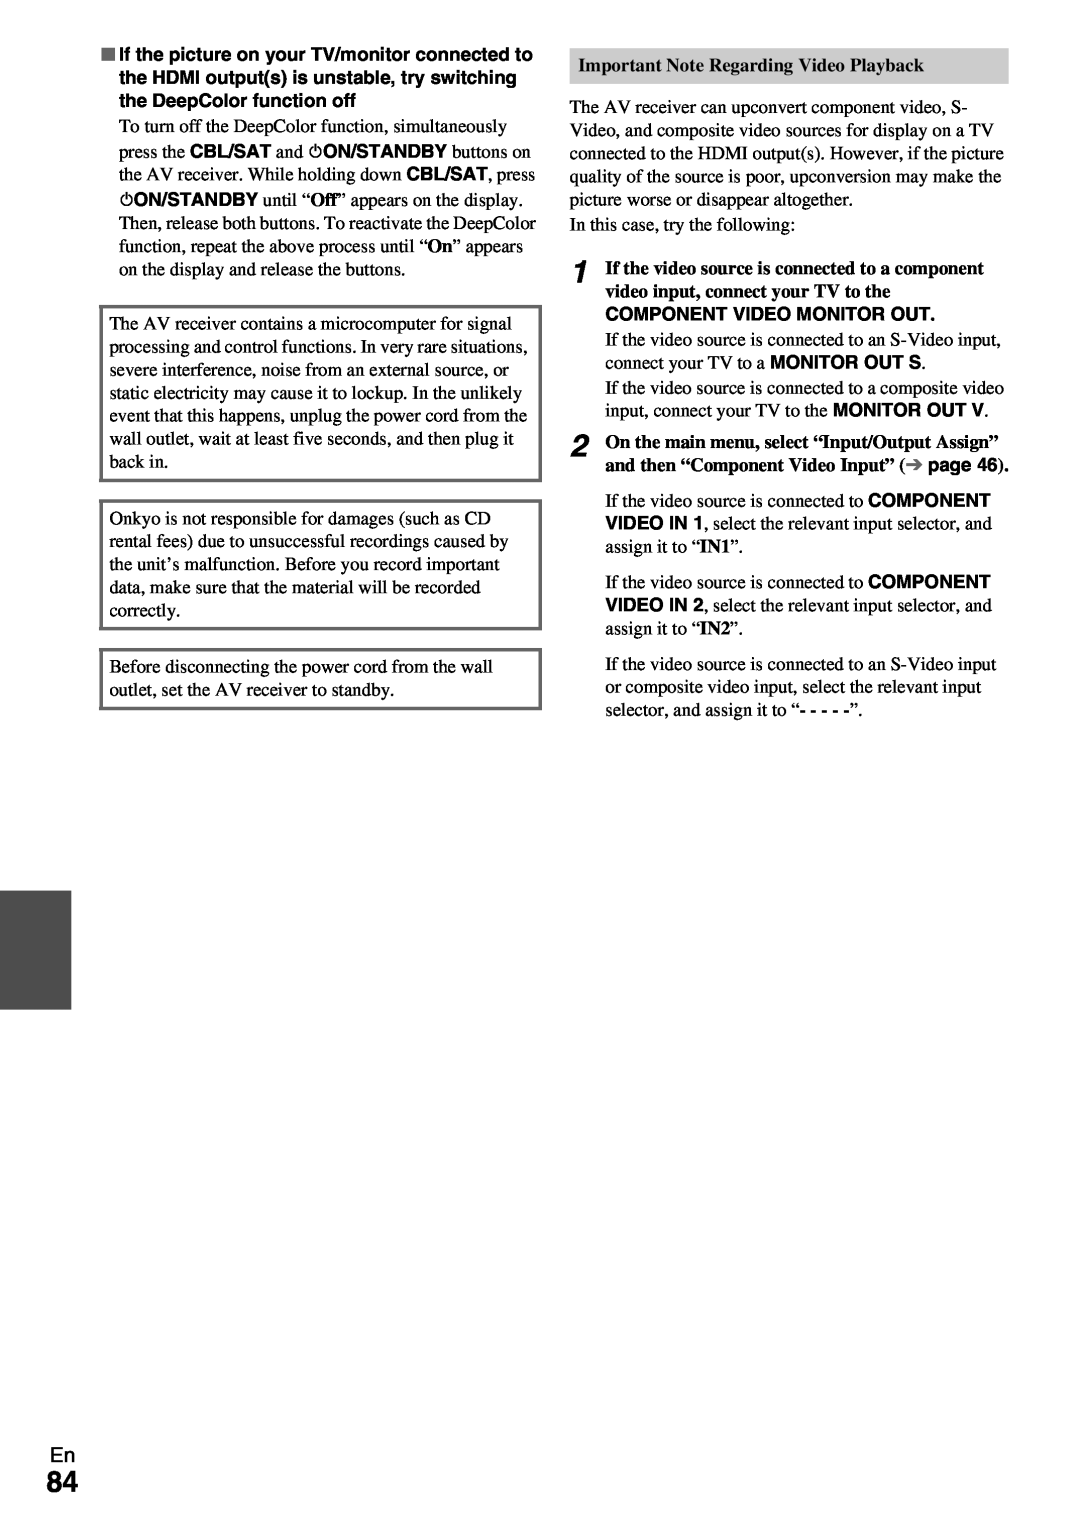 Onkyo TX-NR1009 instruction manual Important Note Regarding Video Playback, Component Video Monitor Out 